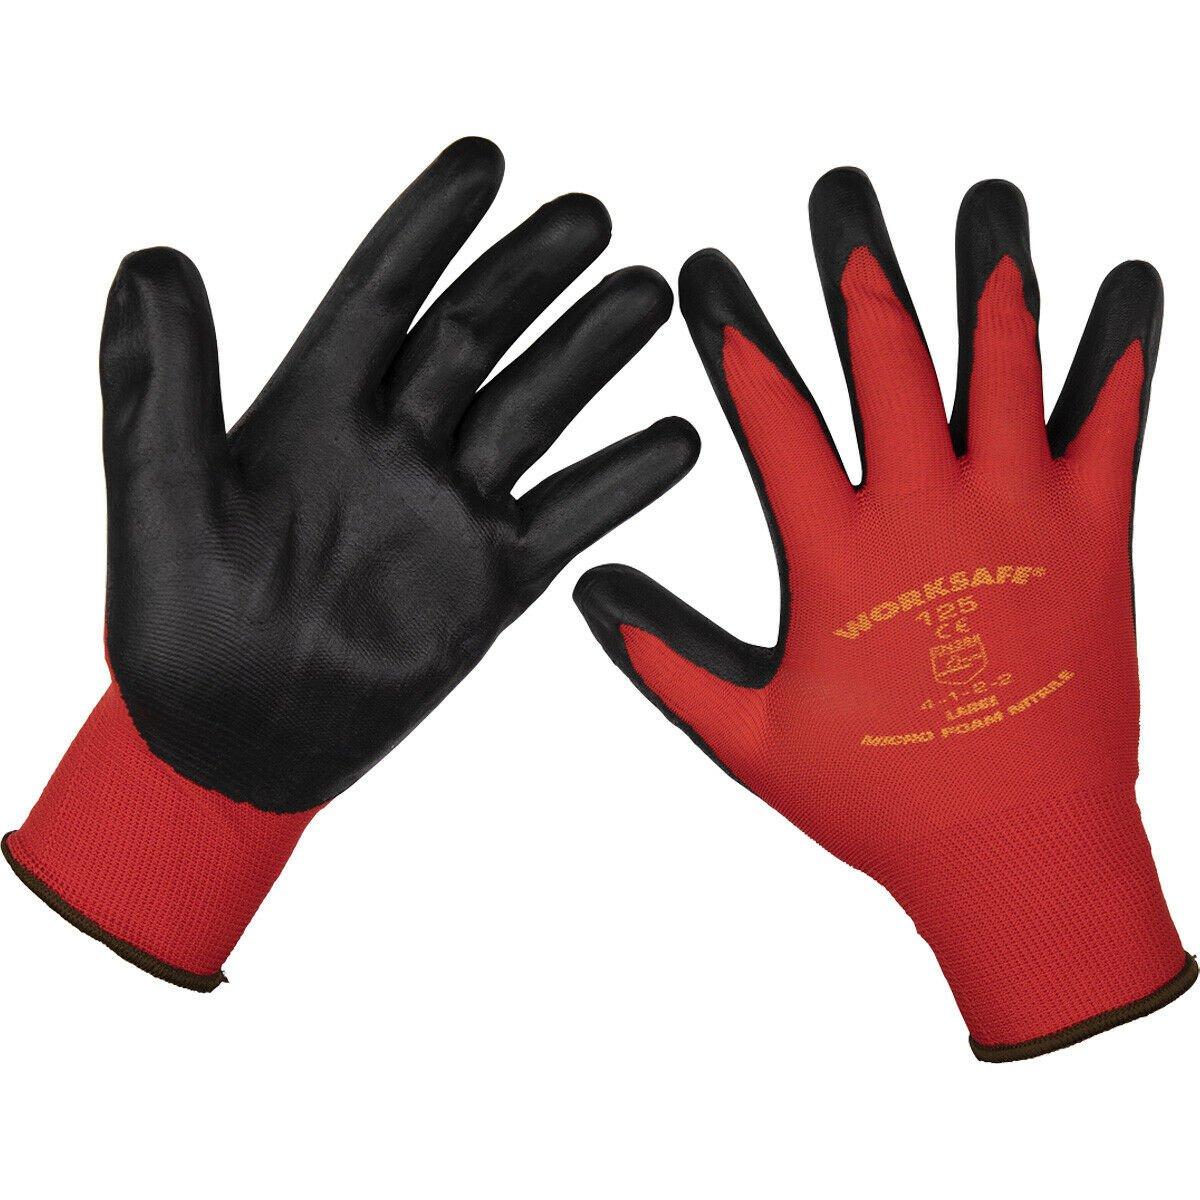 120 PAIRS Flexible Nitrile Foam Palm Gloves - Large - Abrasion Resistant Safety